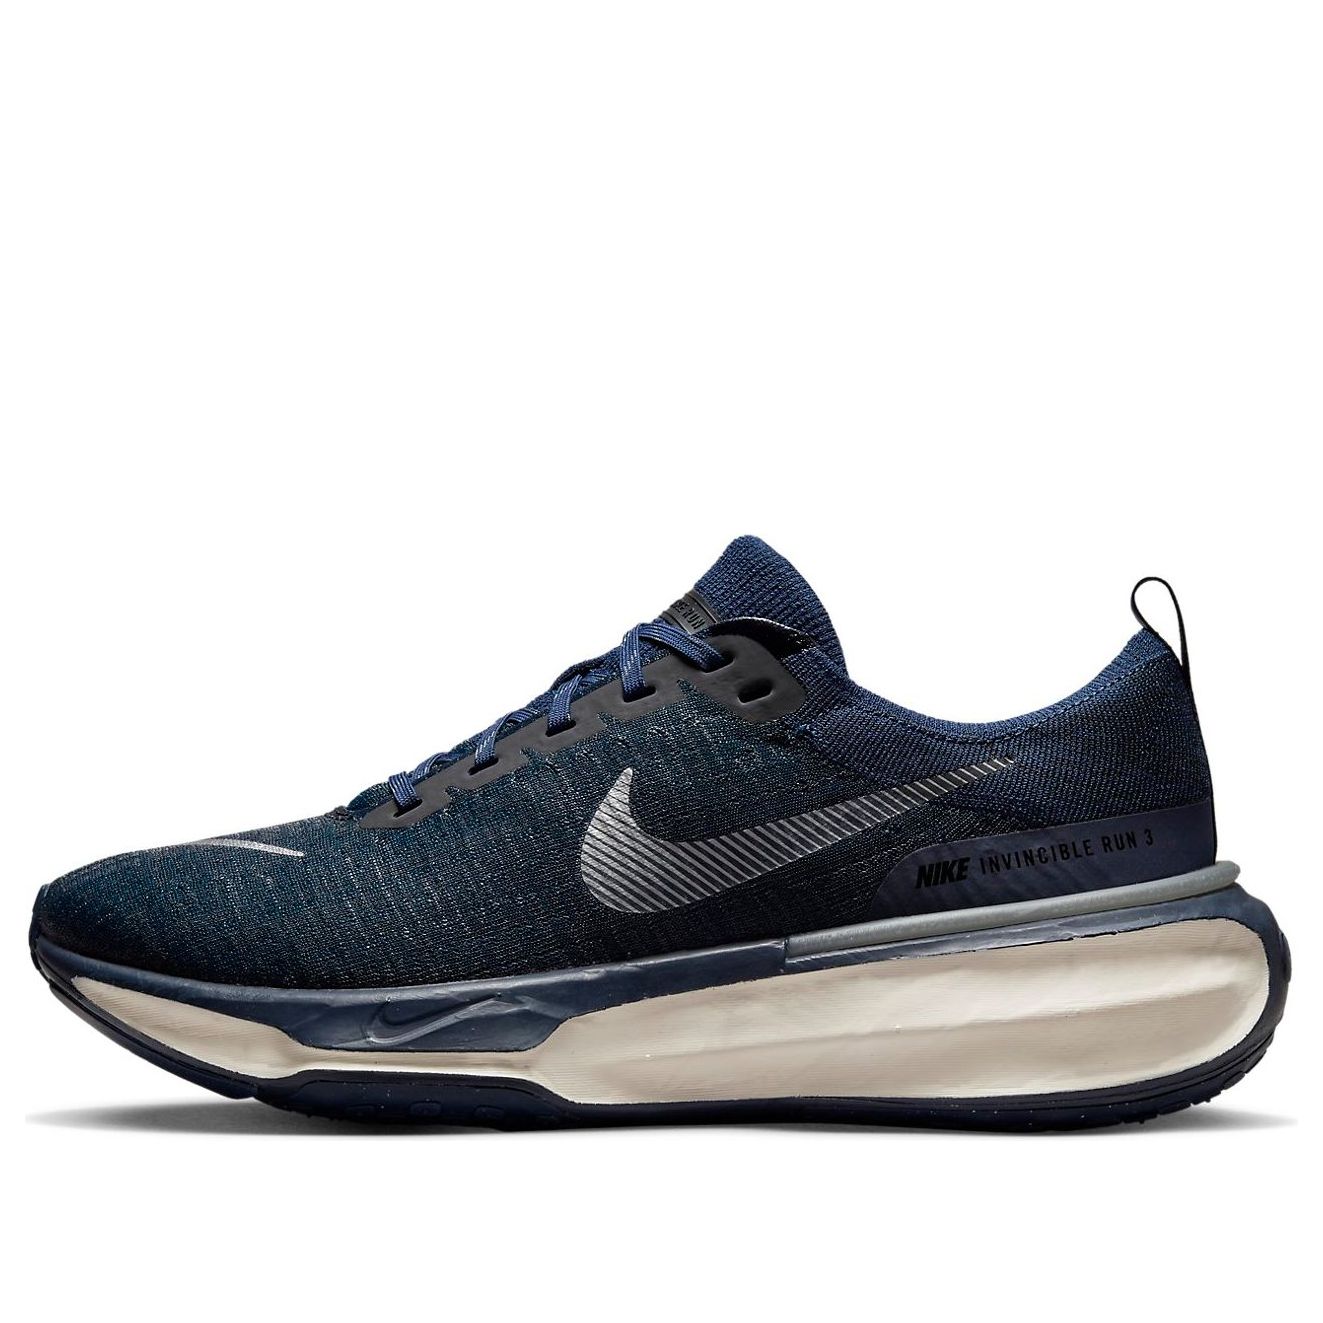 Nike ZoomX Invincible Run Flyknit 3 'College Navy' DR2615-400